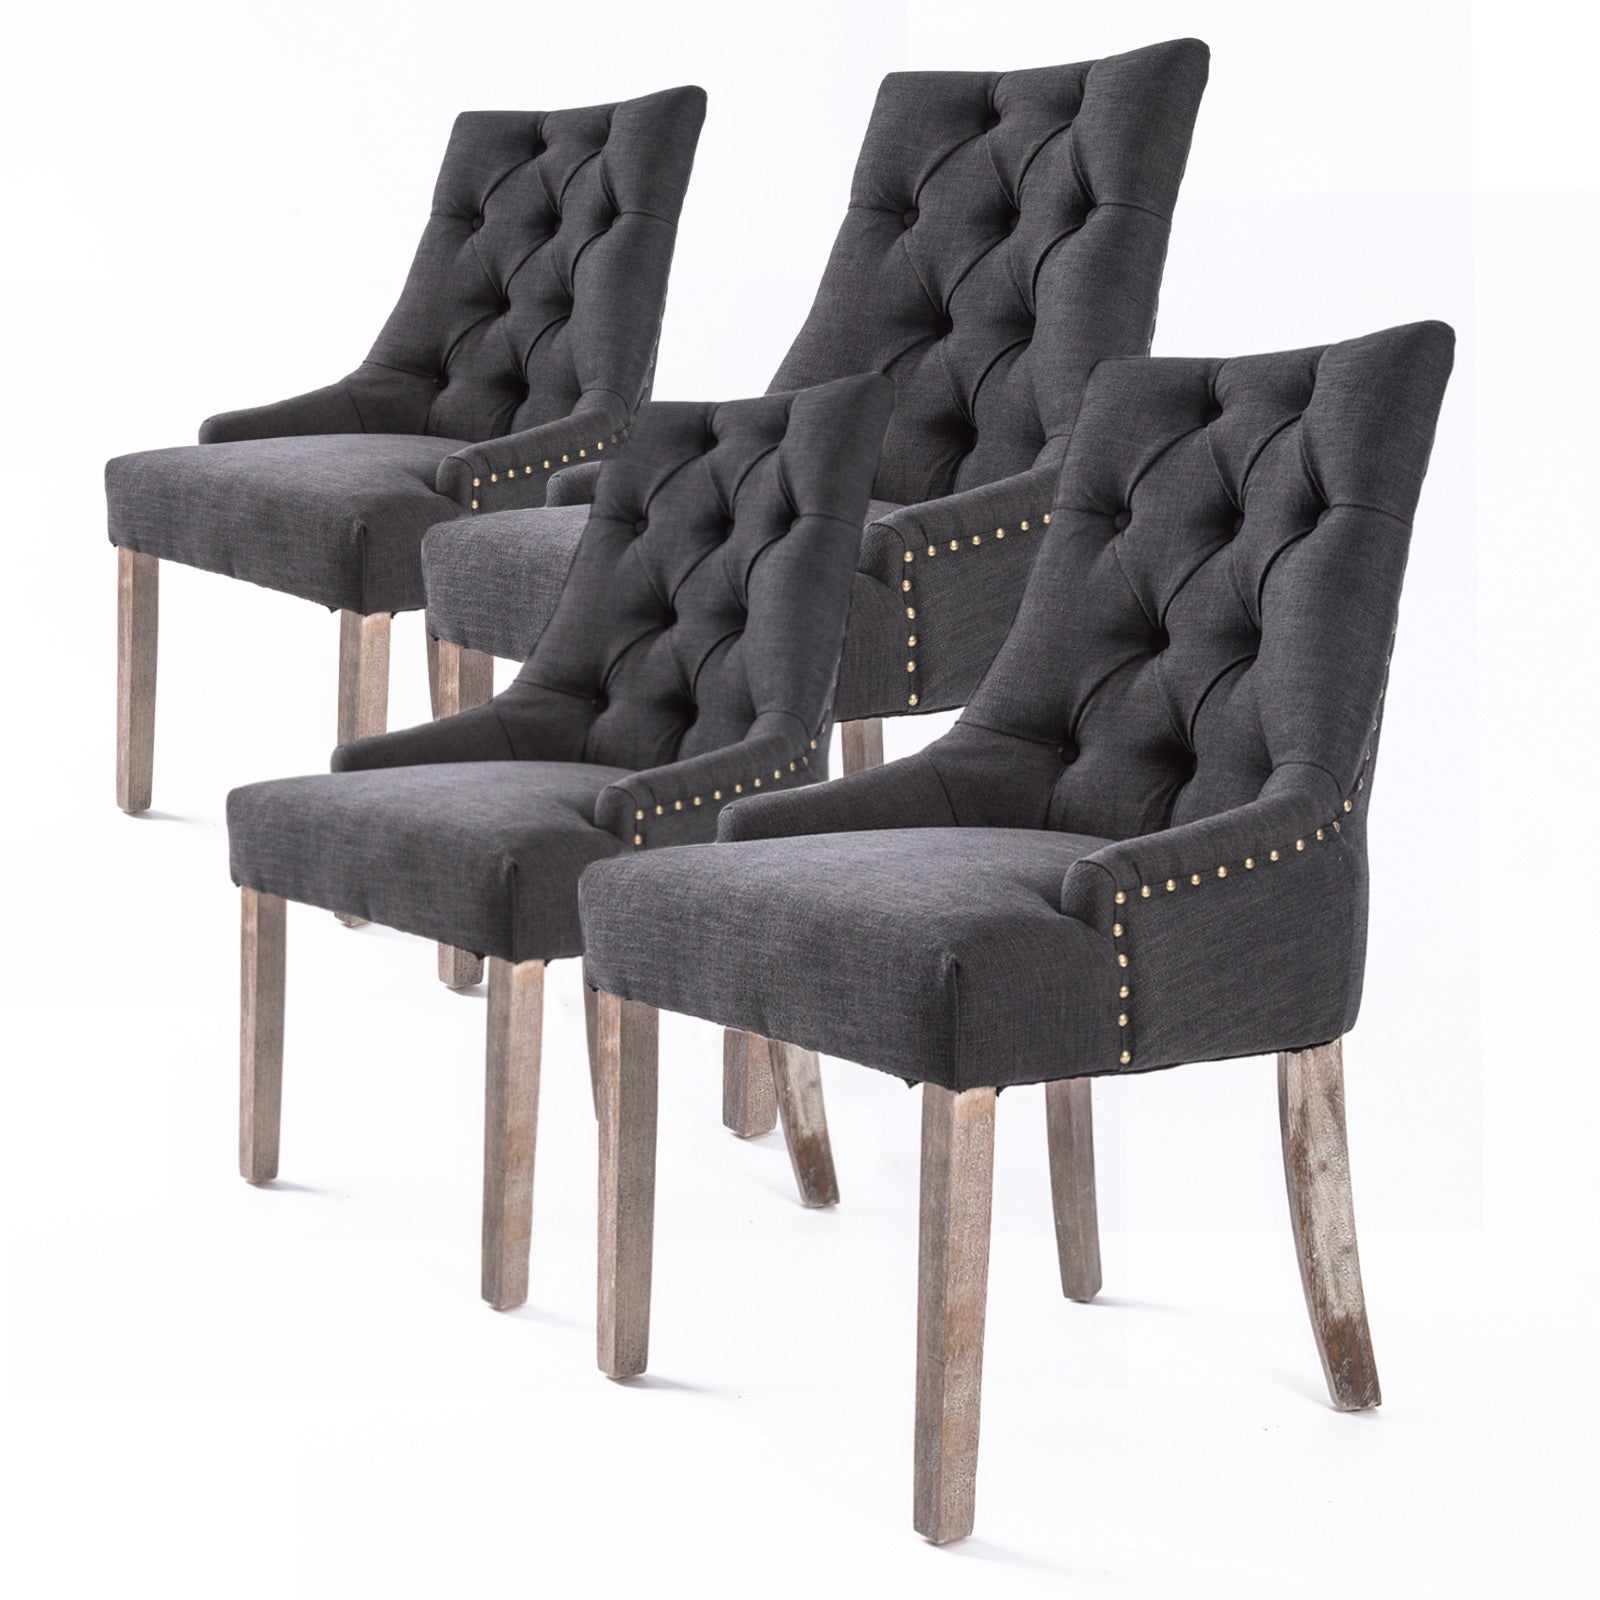 4X French Provincial Dining Chair Oak Leg AMOUR BLACK